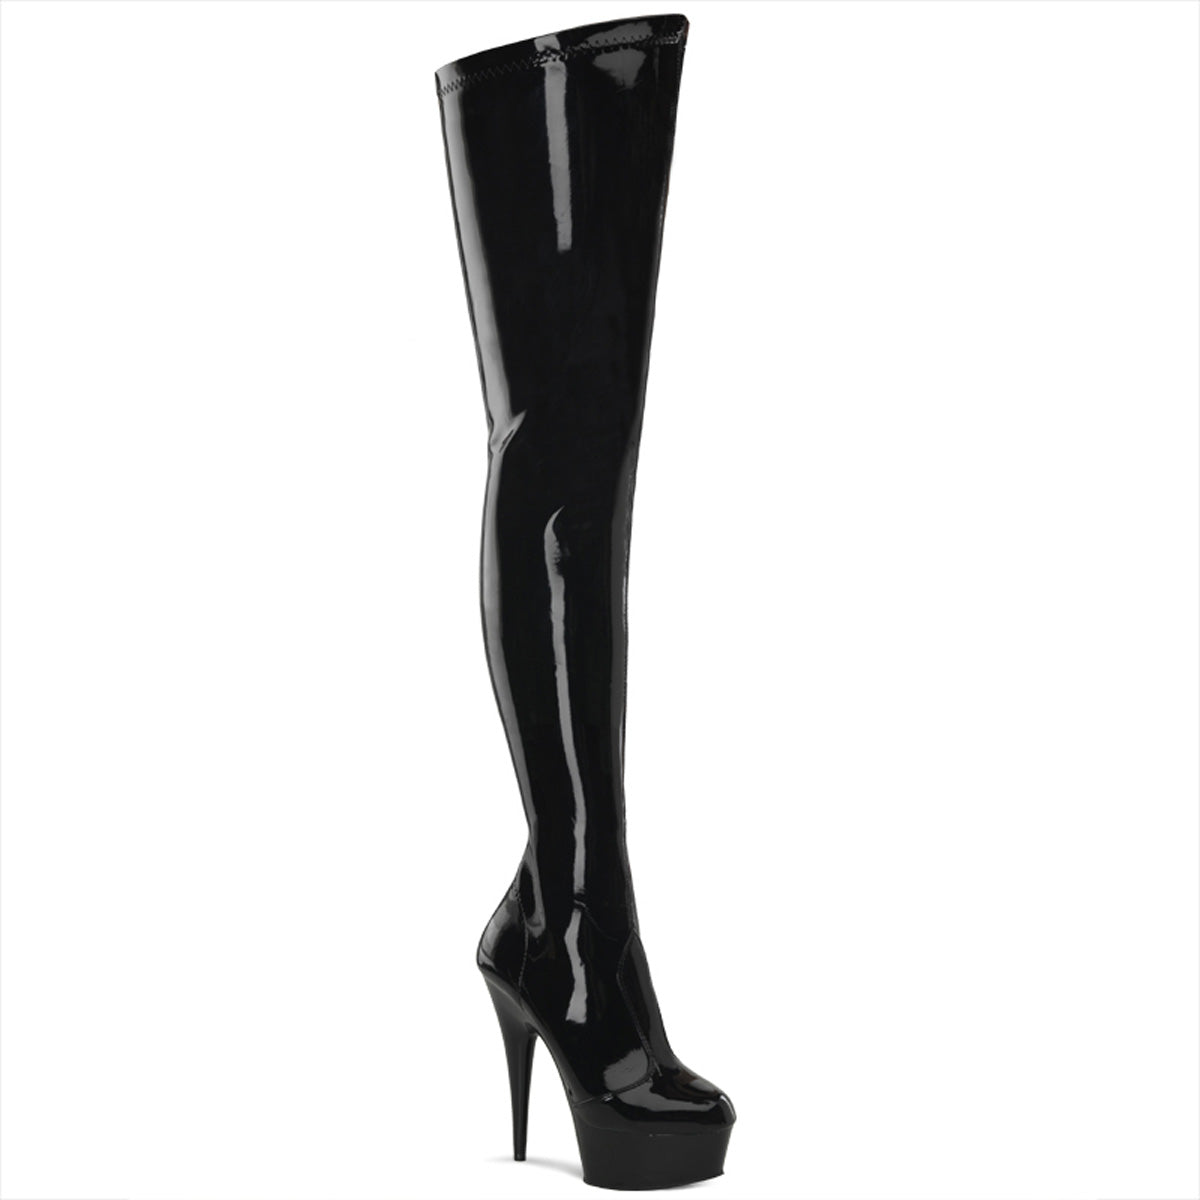 DELIGHT-4000 6" Heel Black Stretch Patent Pole Dancer Boots-Pleaser- Sexy Shoes